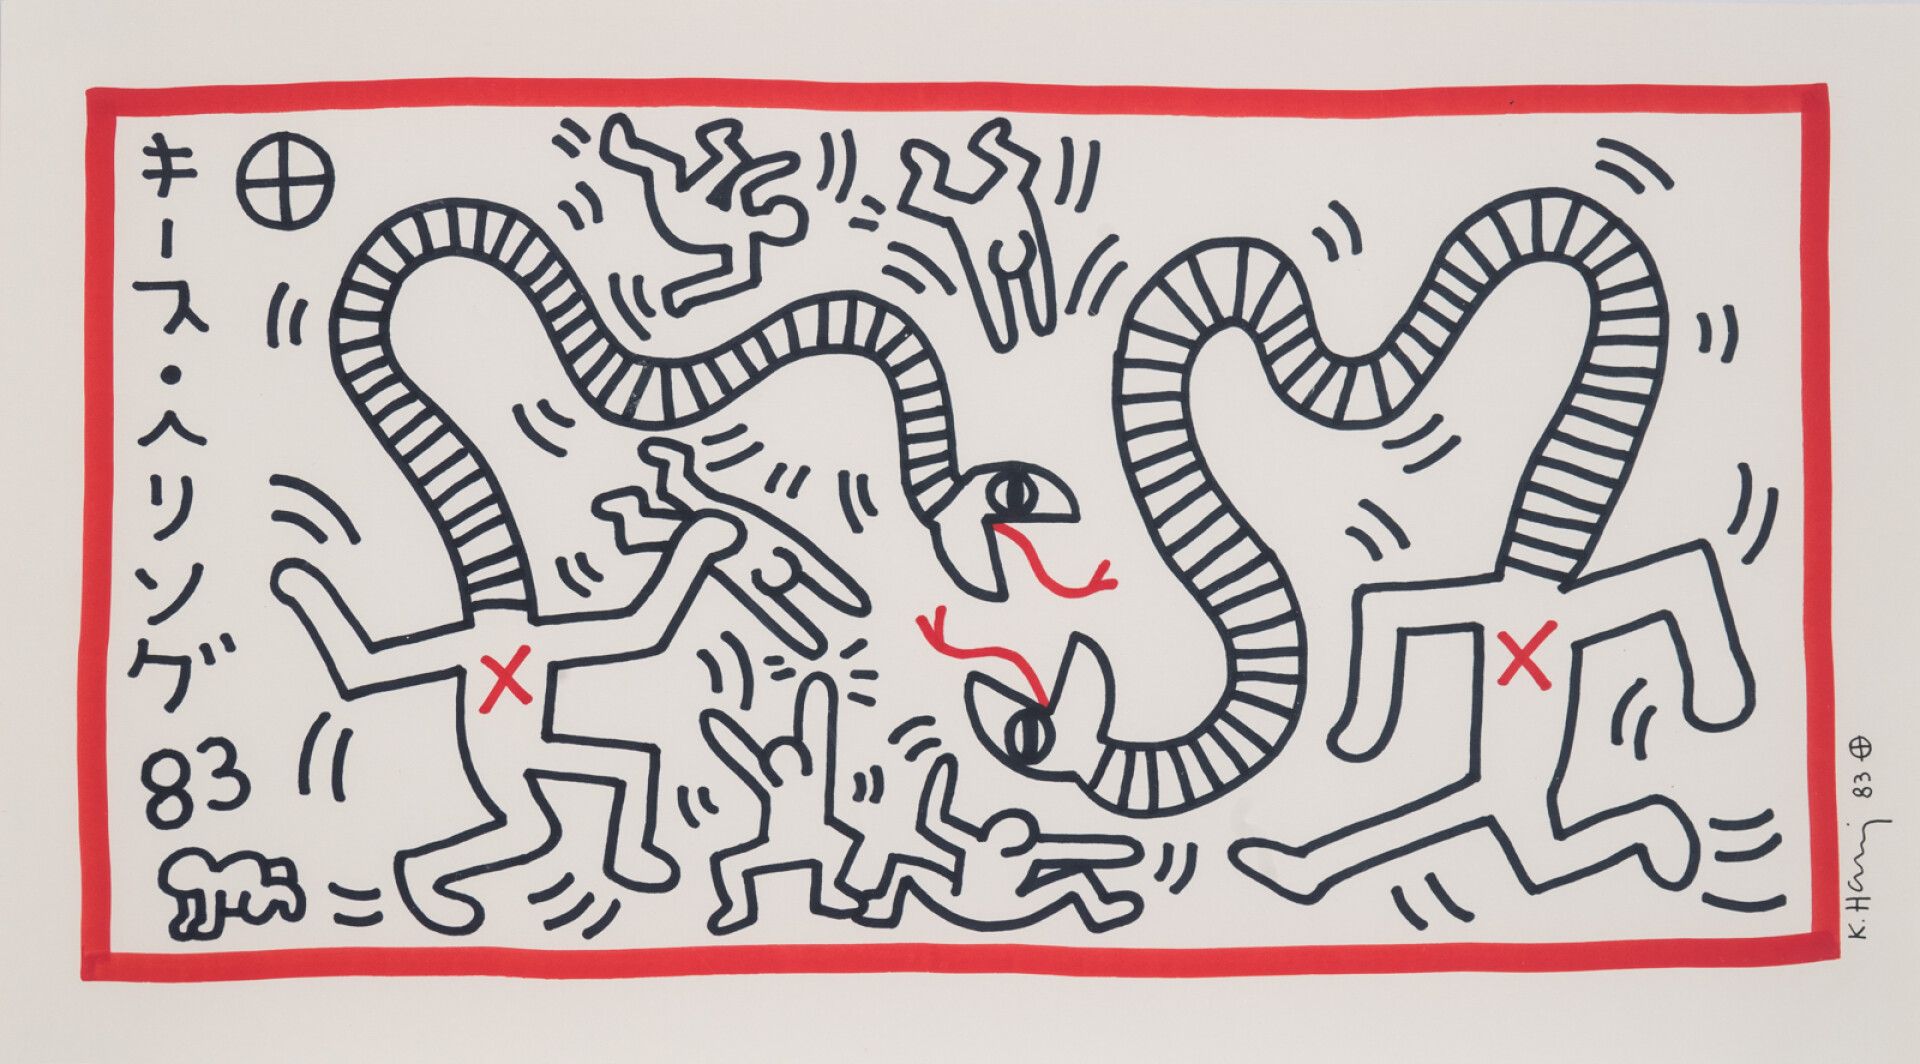 Keith HARING (1958-1990) Keith HARING (1958-1990)

Sans titre, 1983

Dessin au f&hellip;